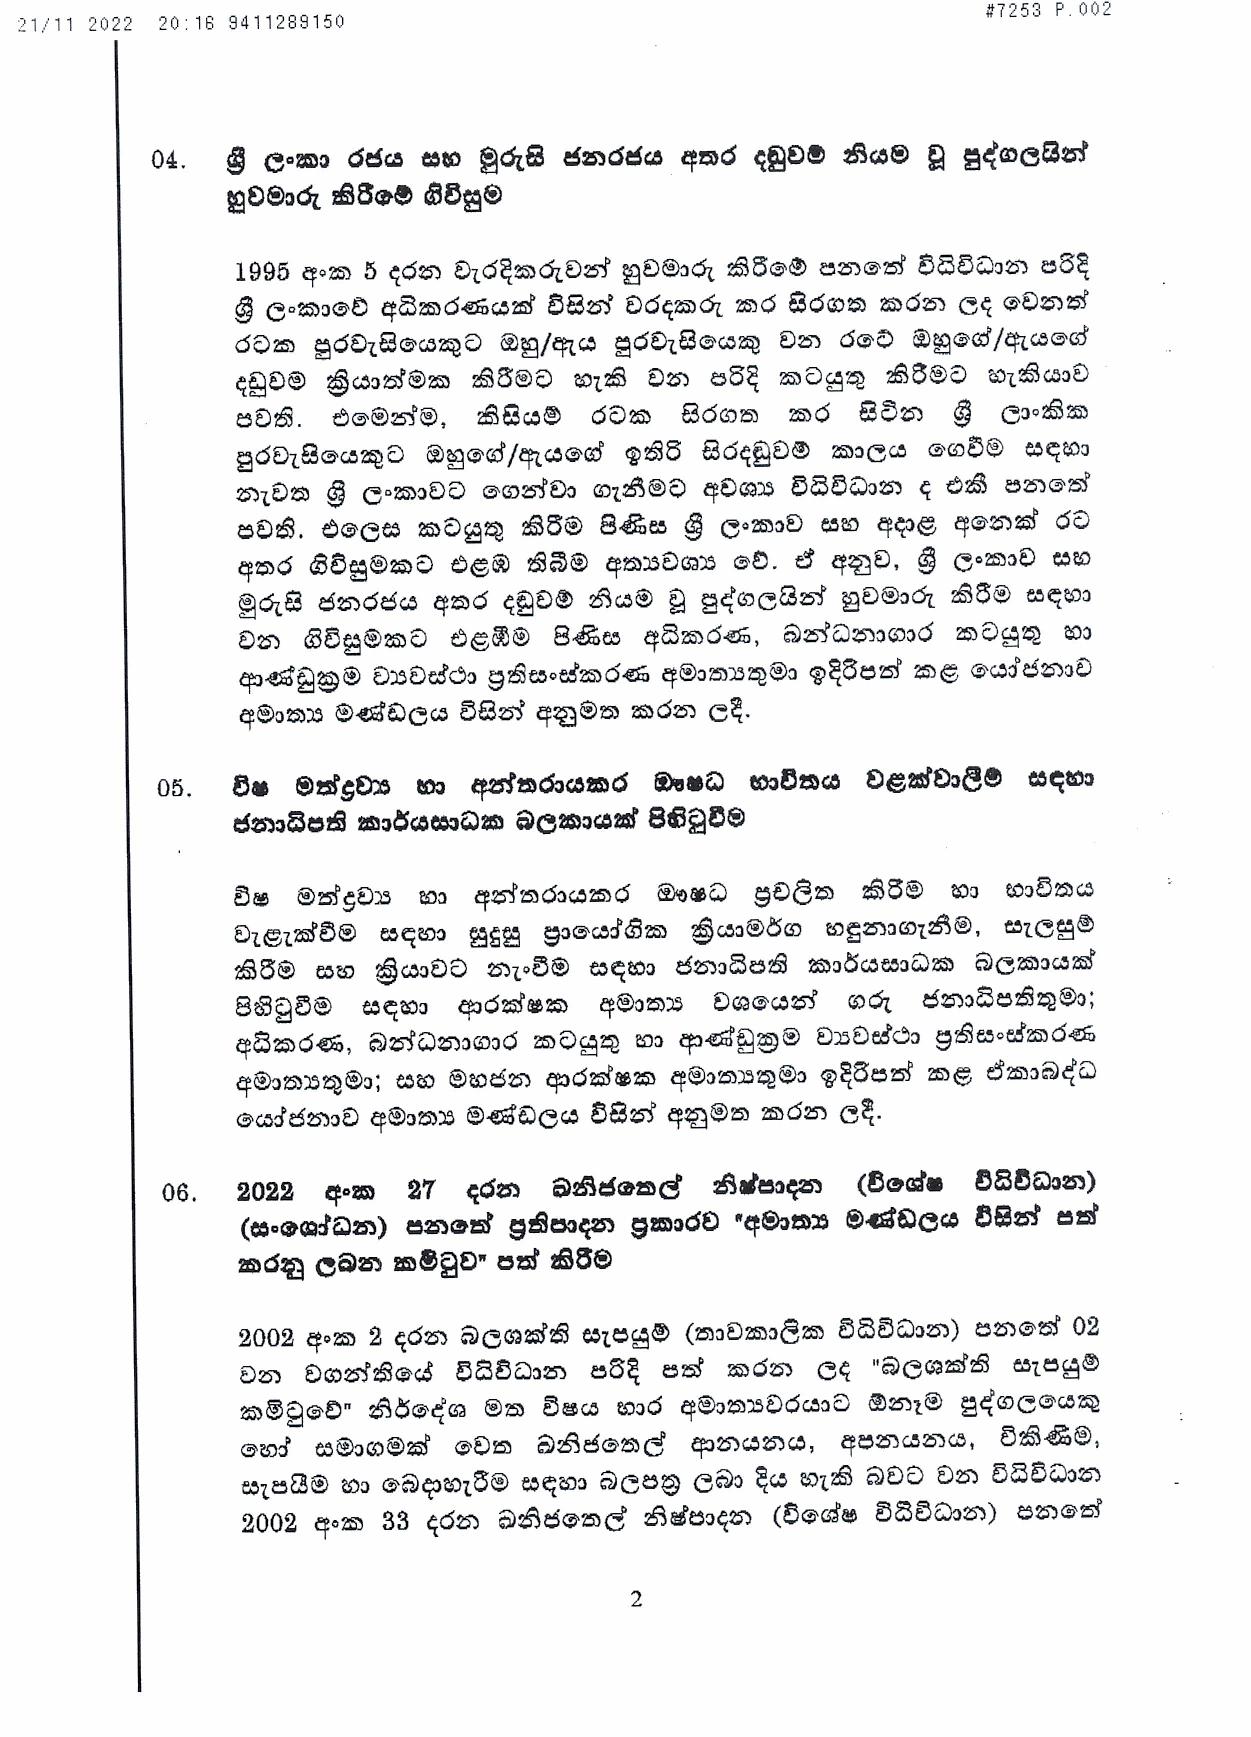 Cabinet Decision on 21.11.2022 page 002